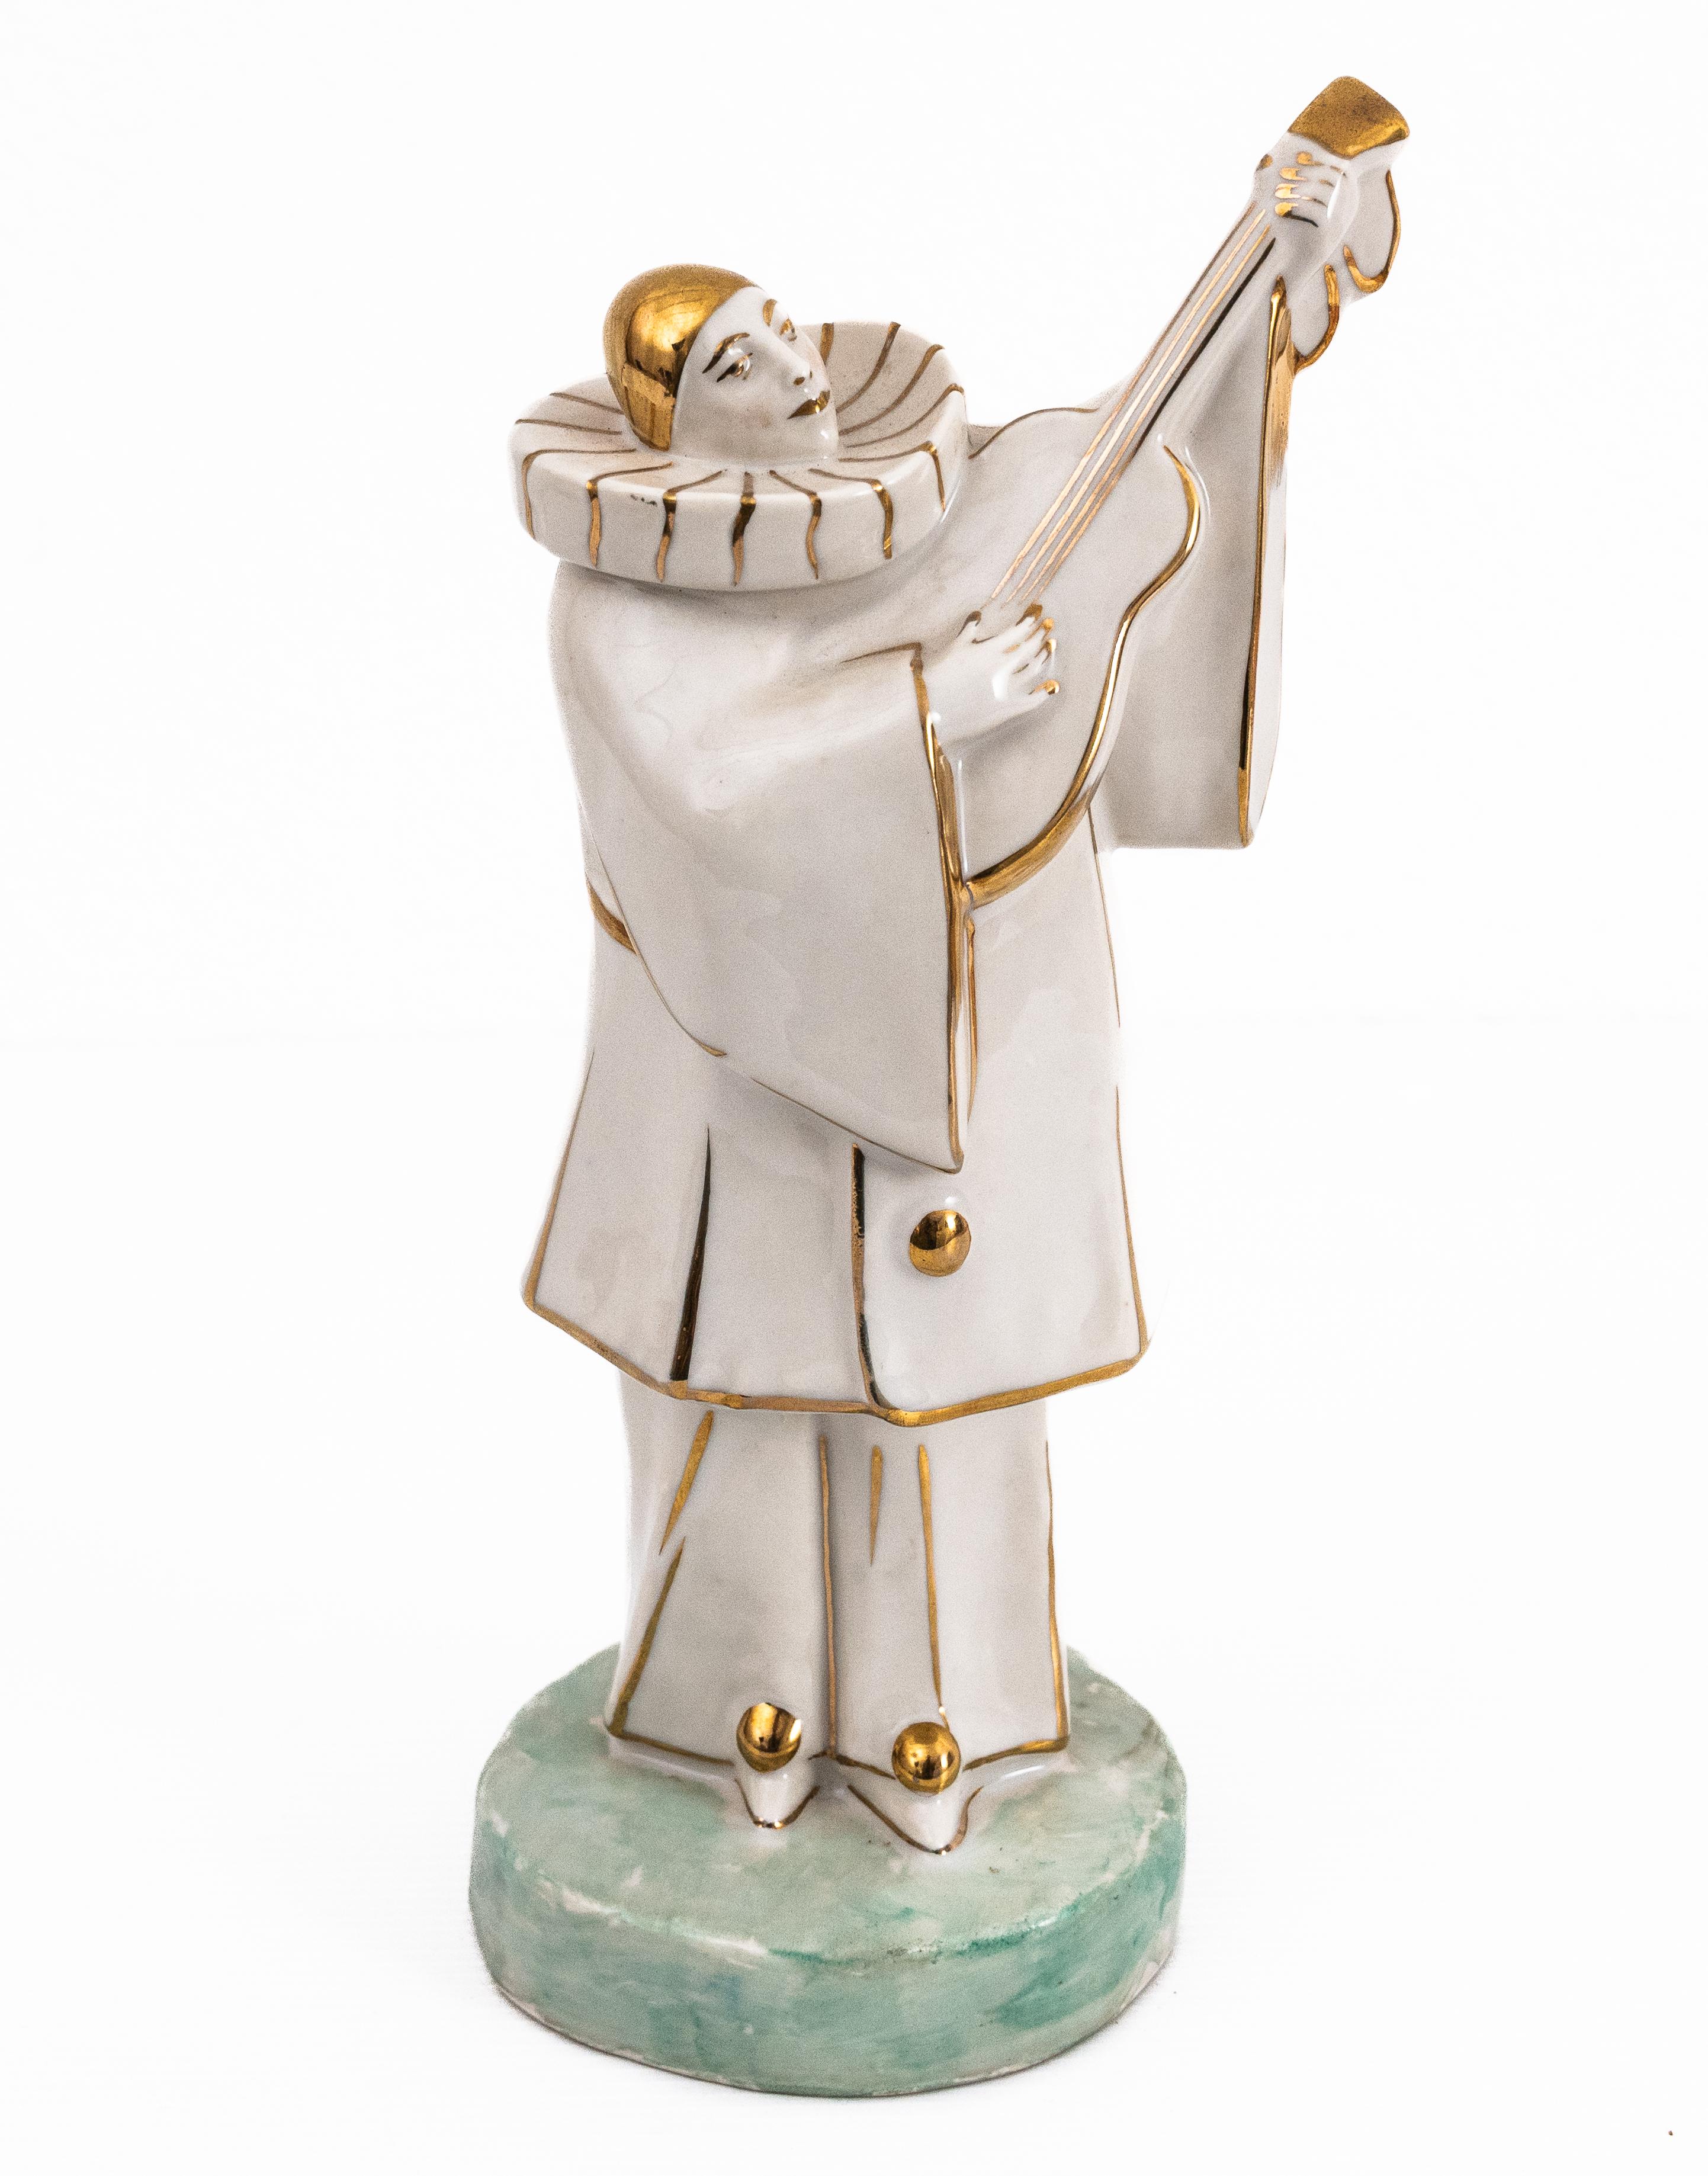 Limoges Porcelain Pierrot Musician in White and Gold by Edouard Marcel Sandoz For Sale 1